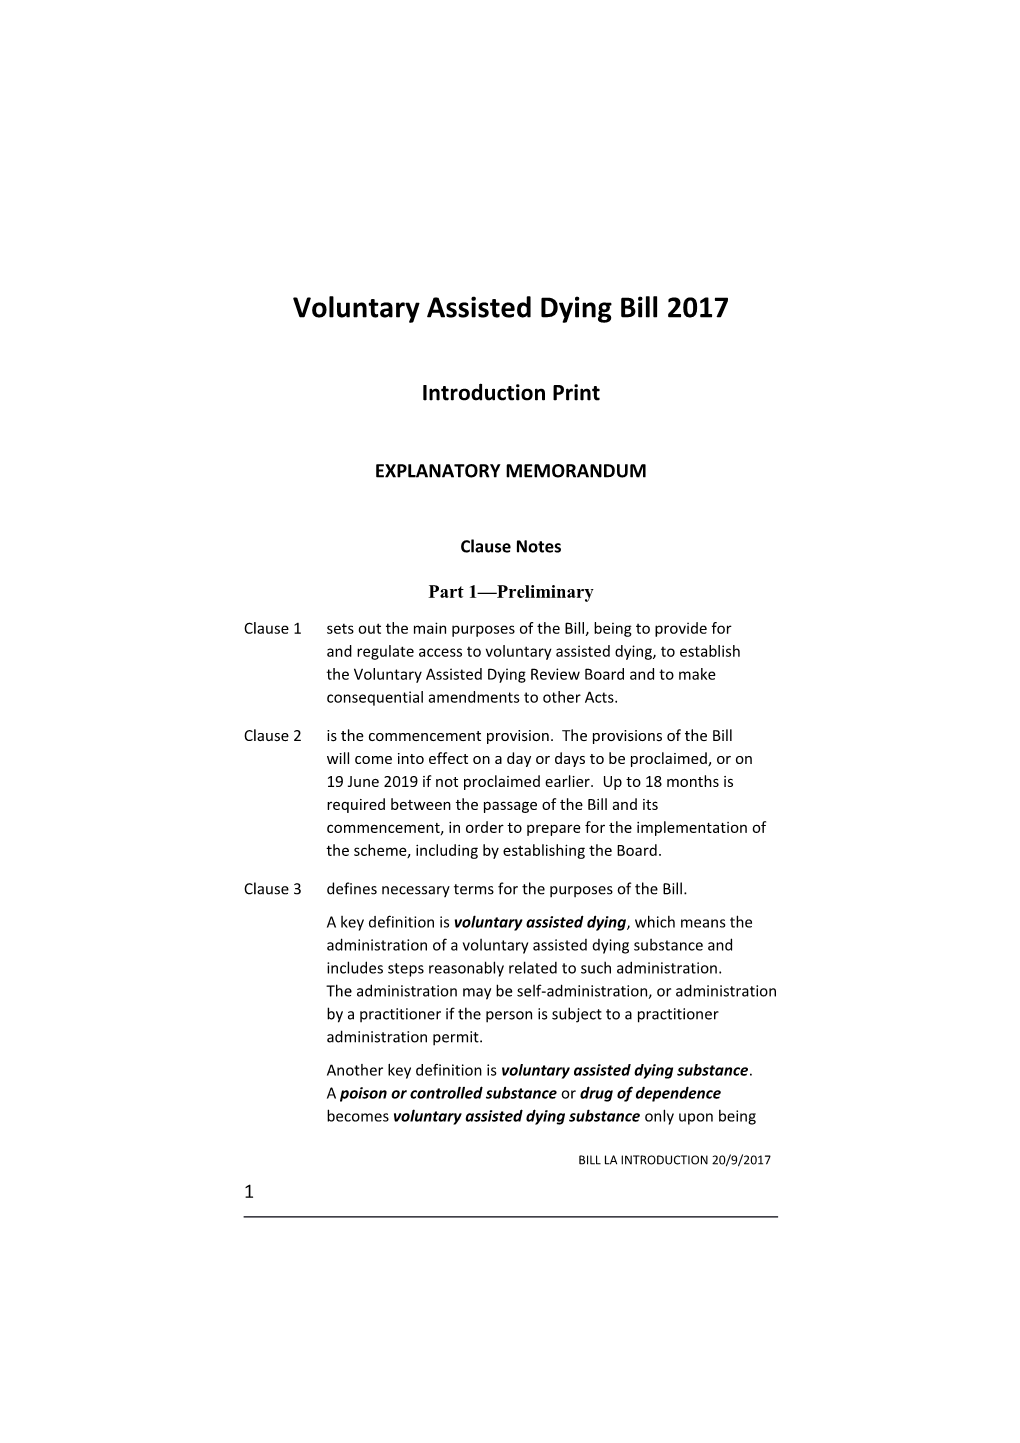 Voluntary Assisted Dying Bill 2017